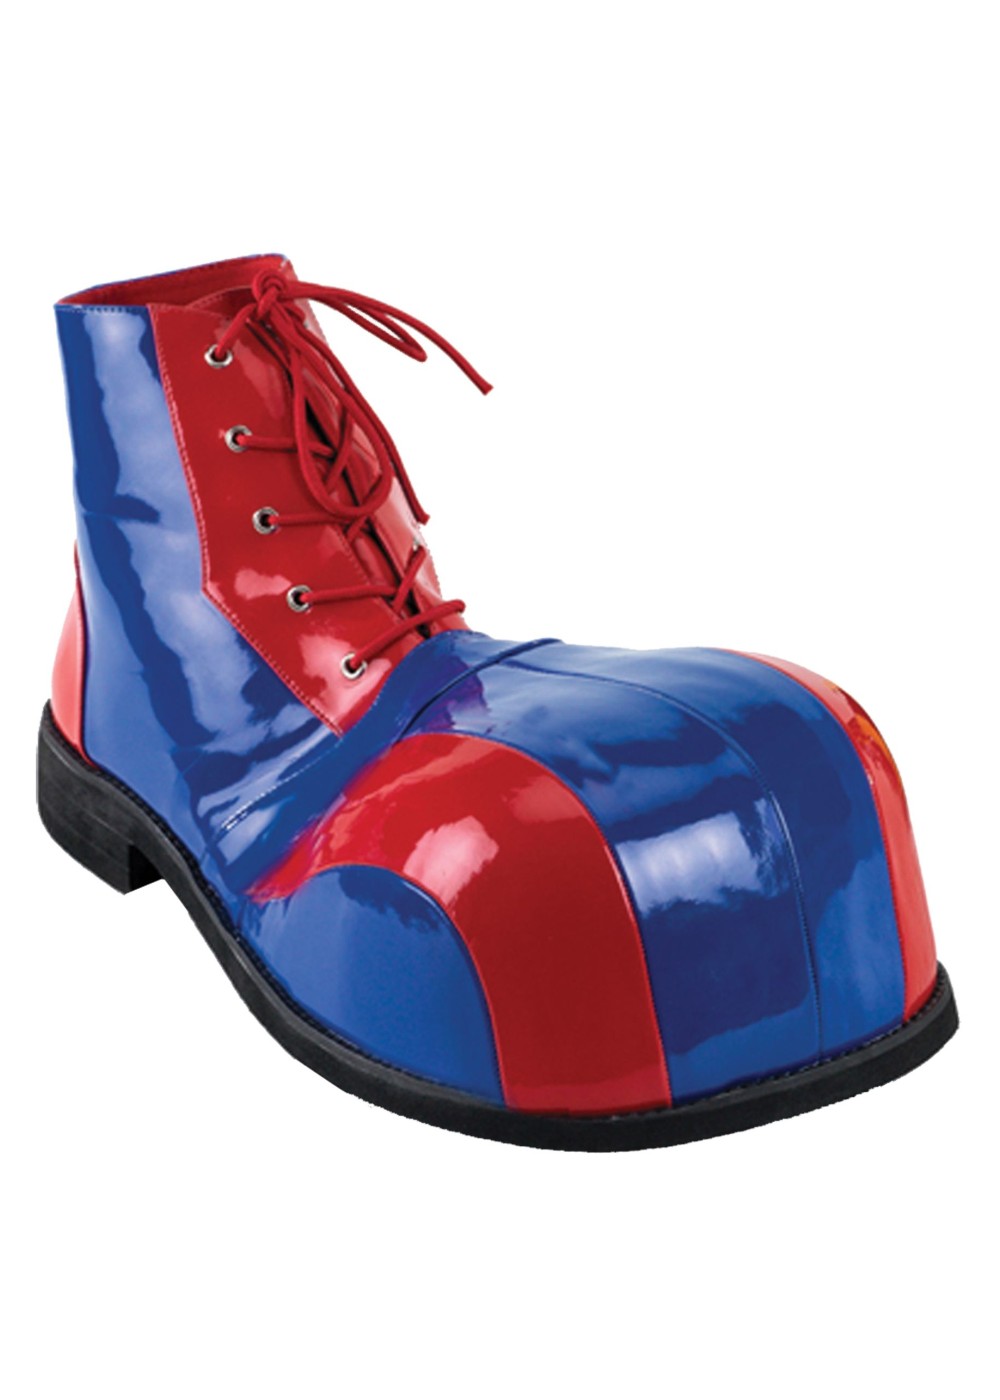 Red And Blue Deluxe Clown Shoes